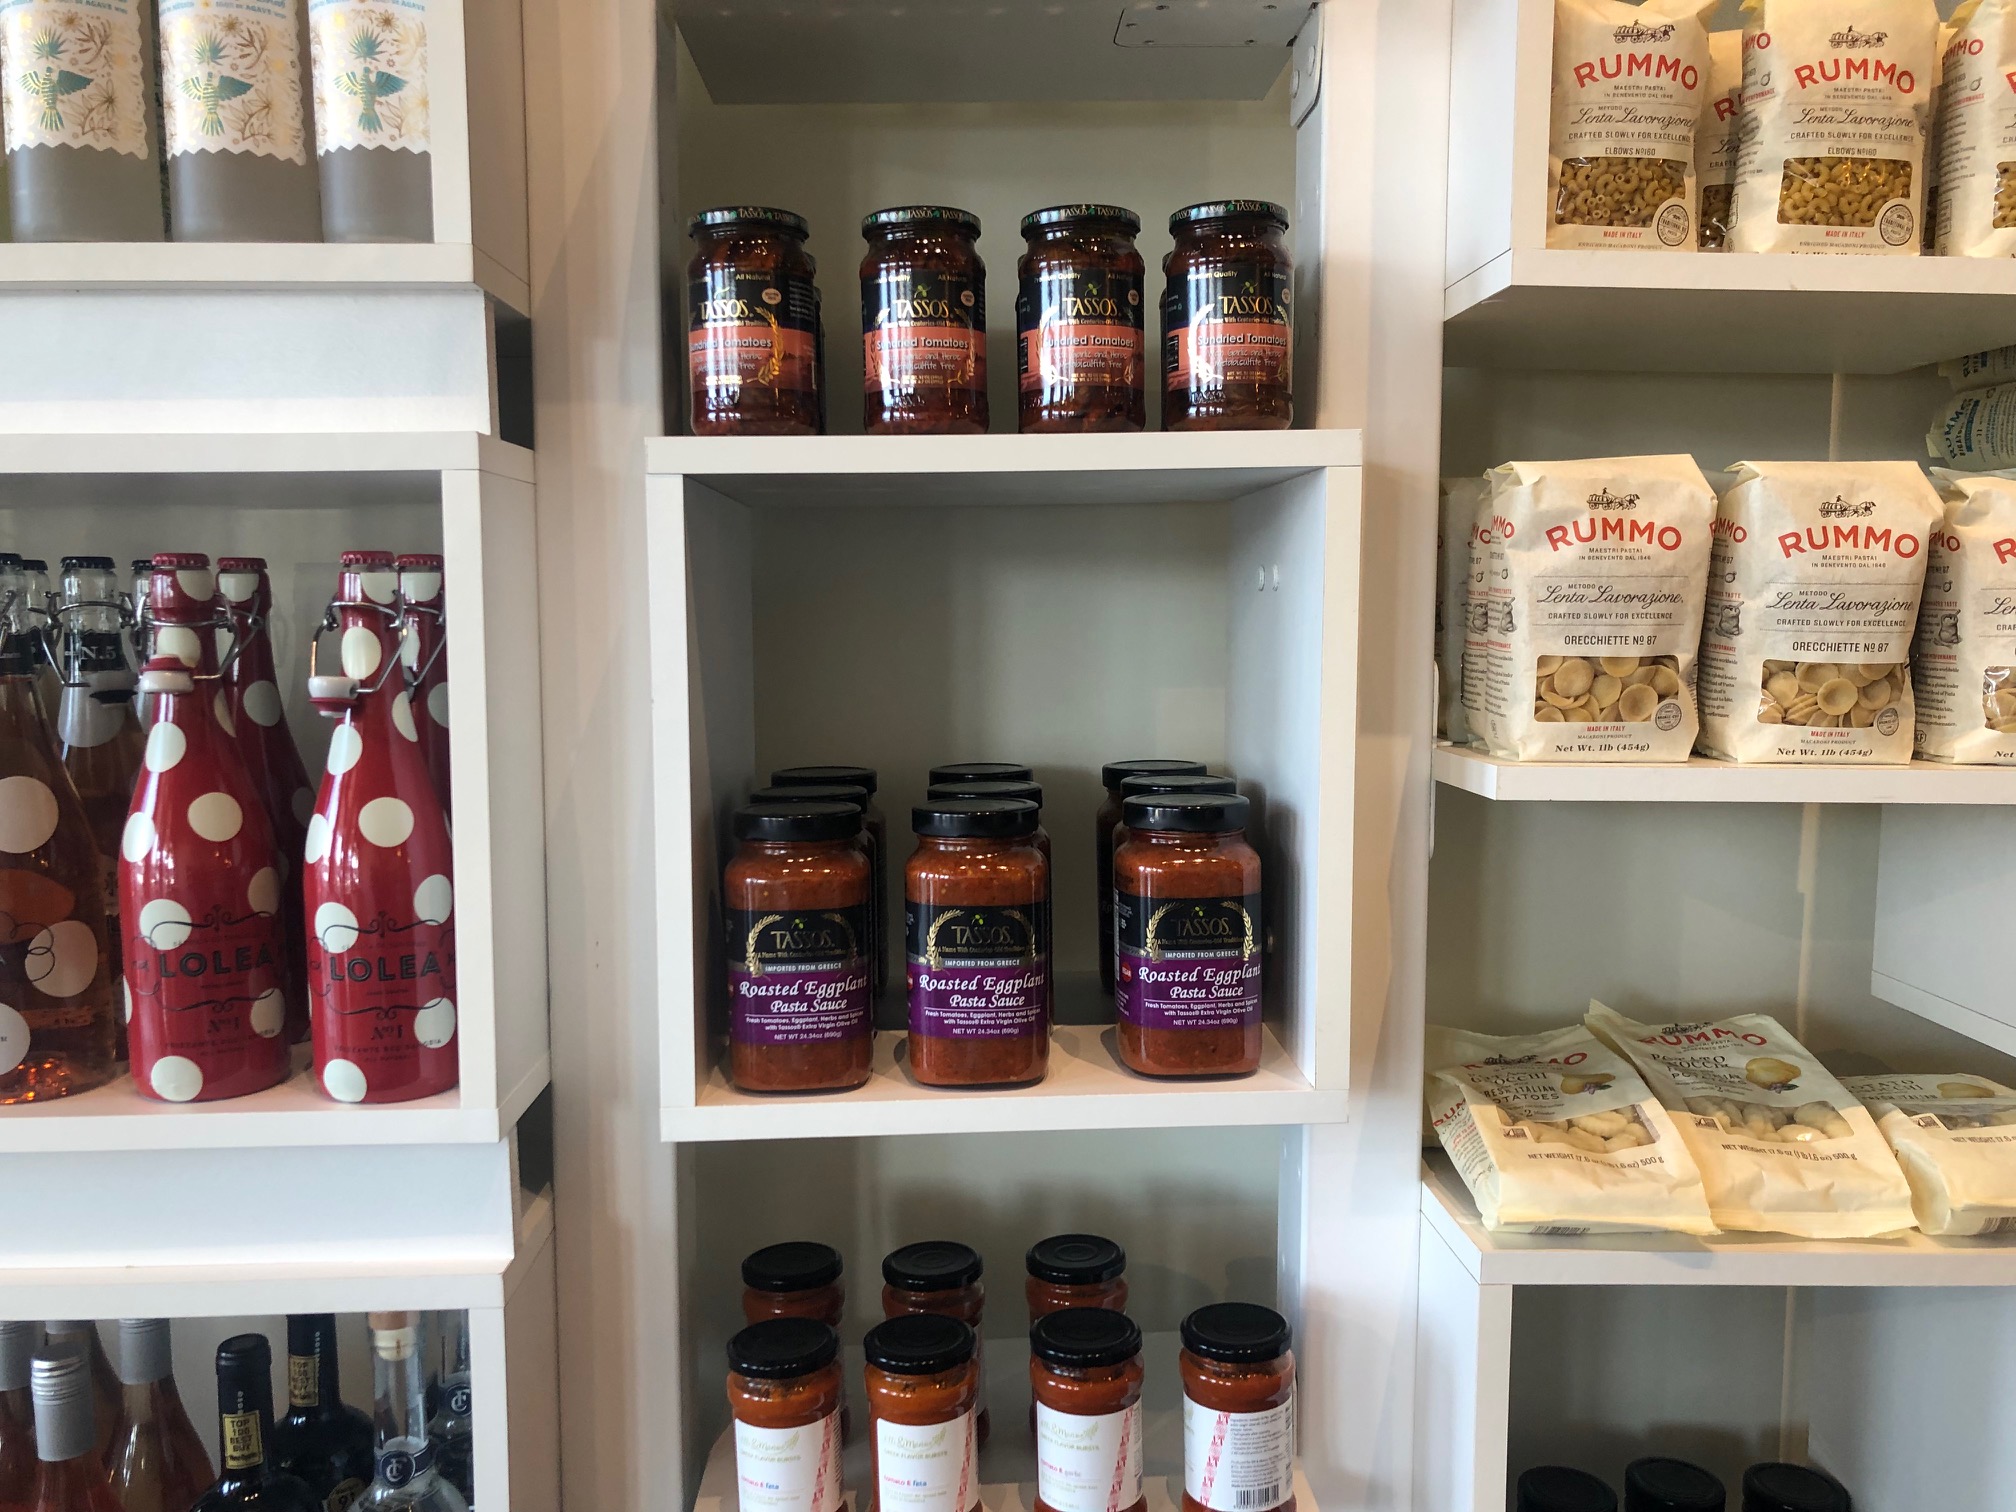 White shelves are neatly stocked with dry pasta in bags and jarred red sauce. Photo by Alyssa Buckley.